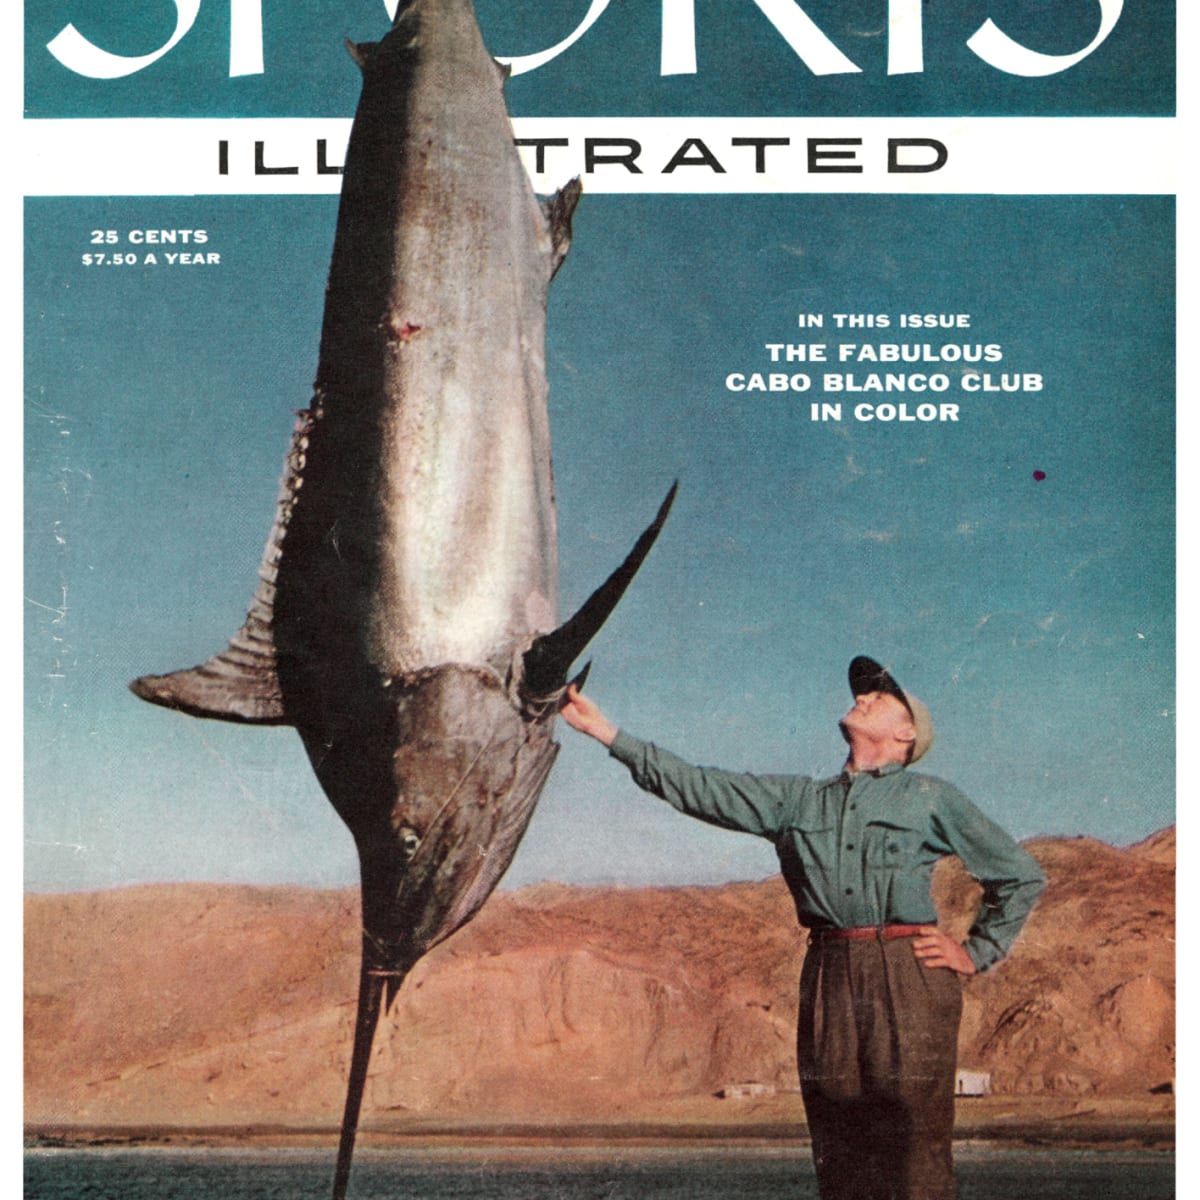 March 19, 1956 - Sports Illustrated Vault